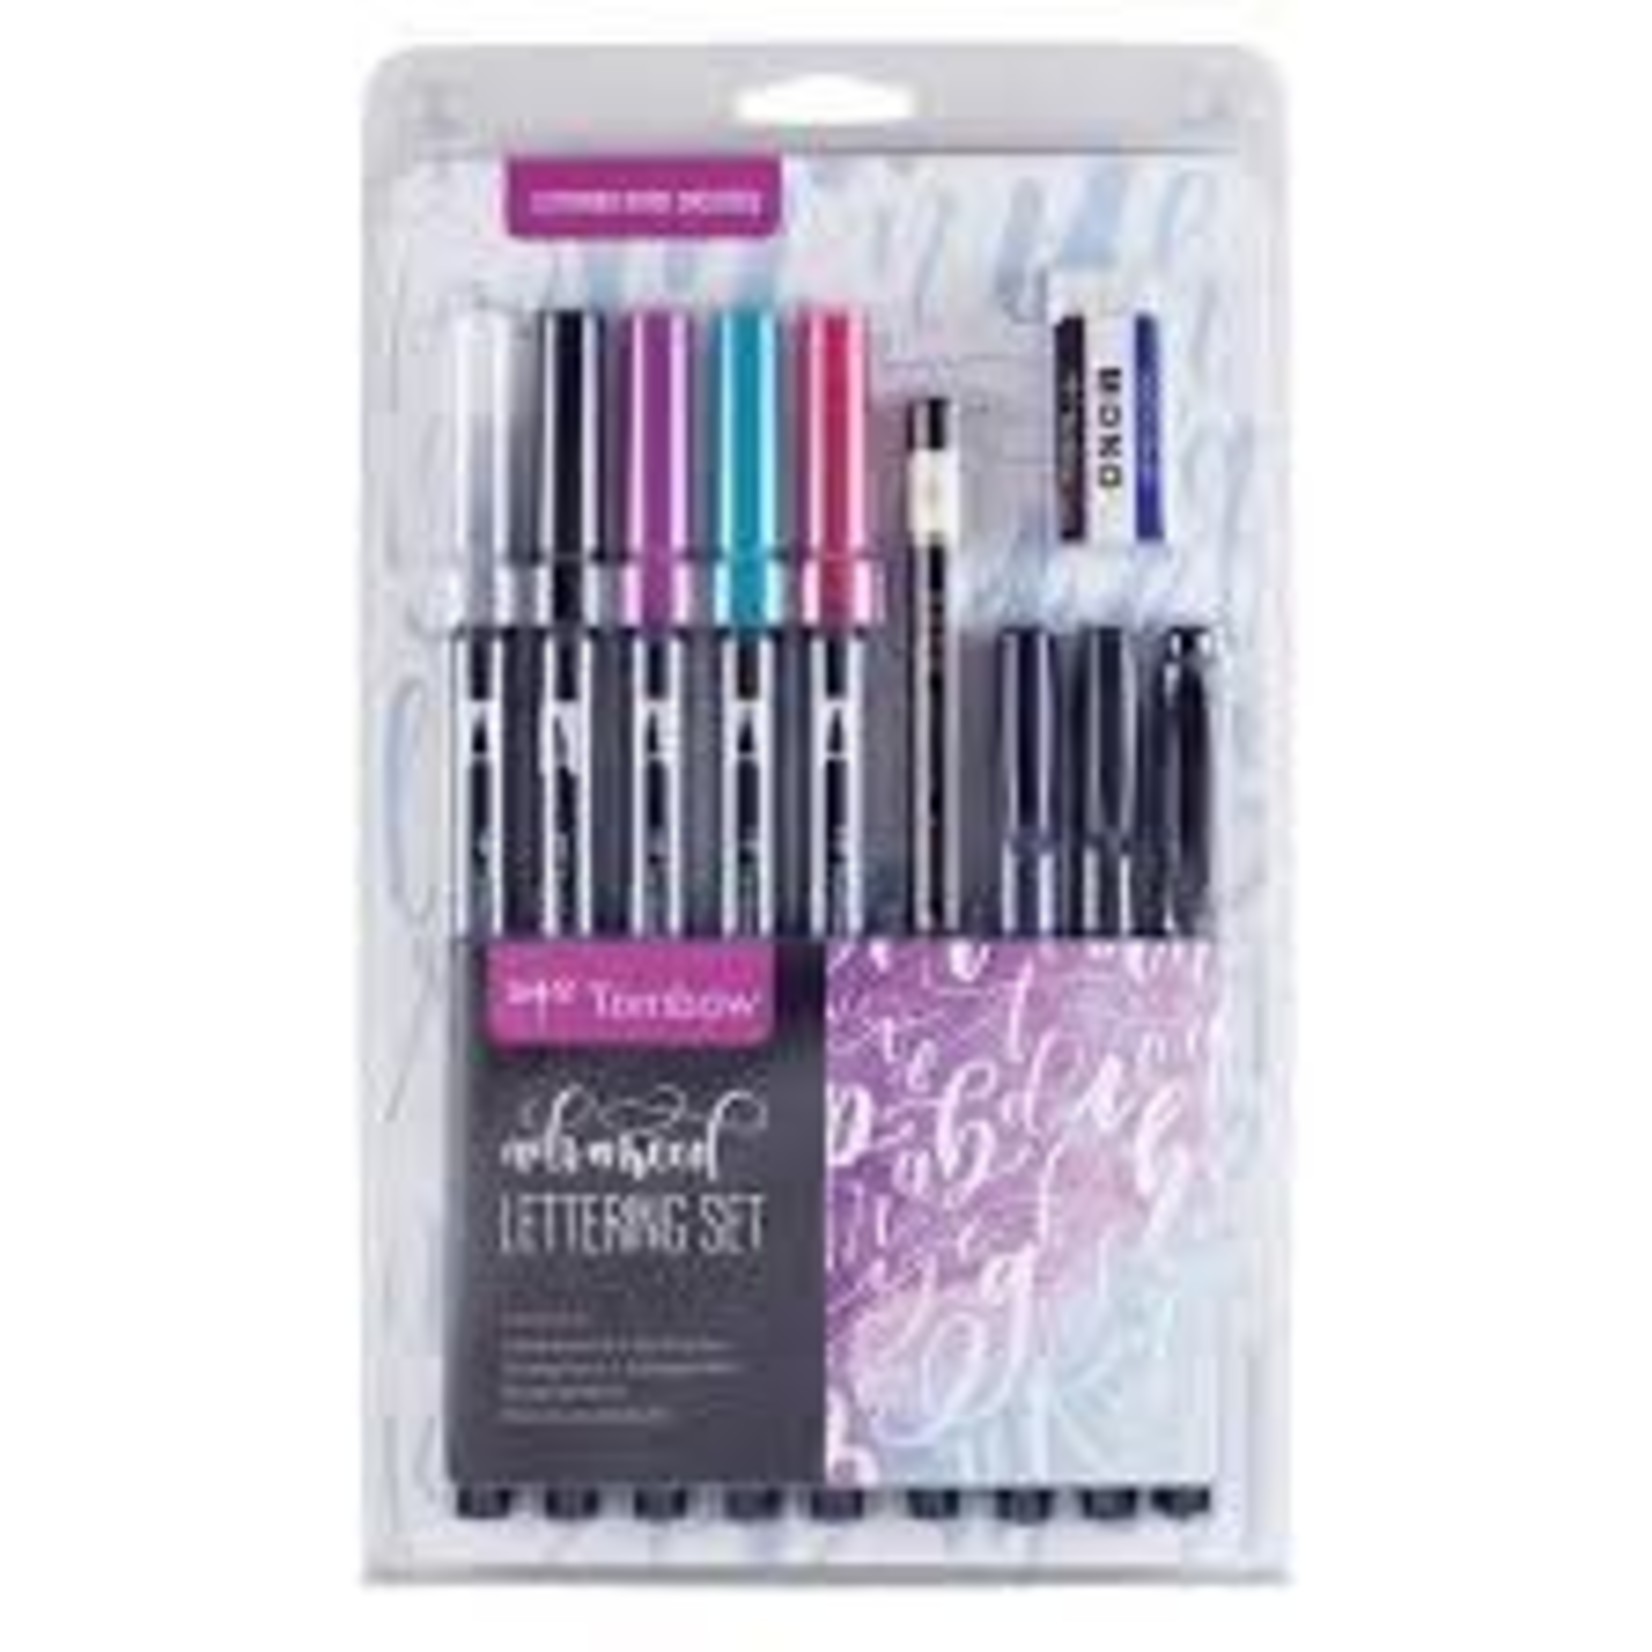 TOMBOW ADVANCED LETTERING SET OF 10